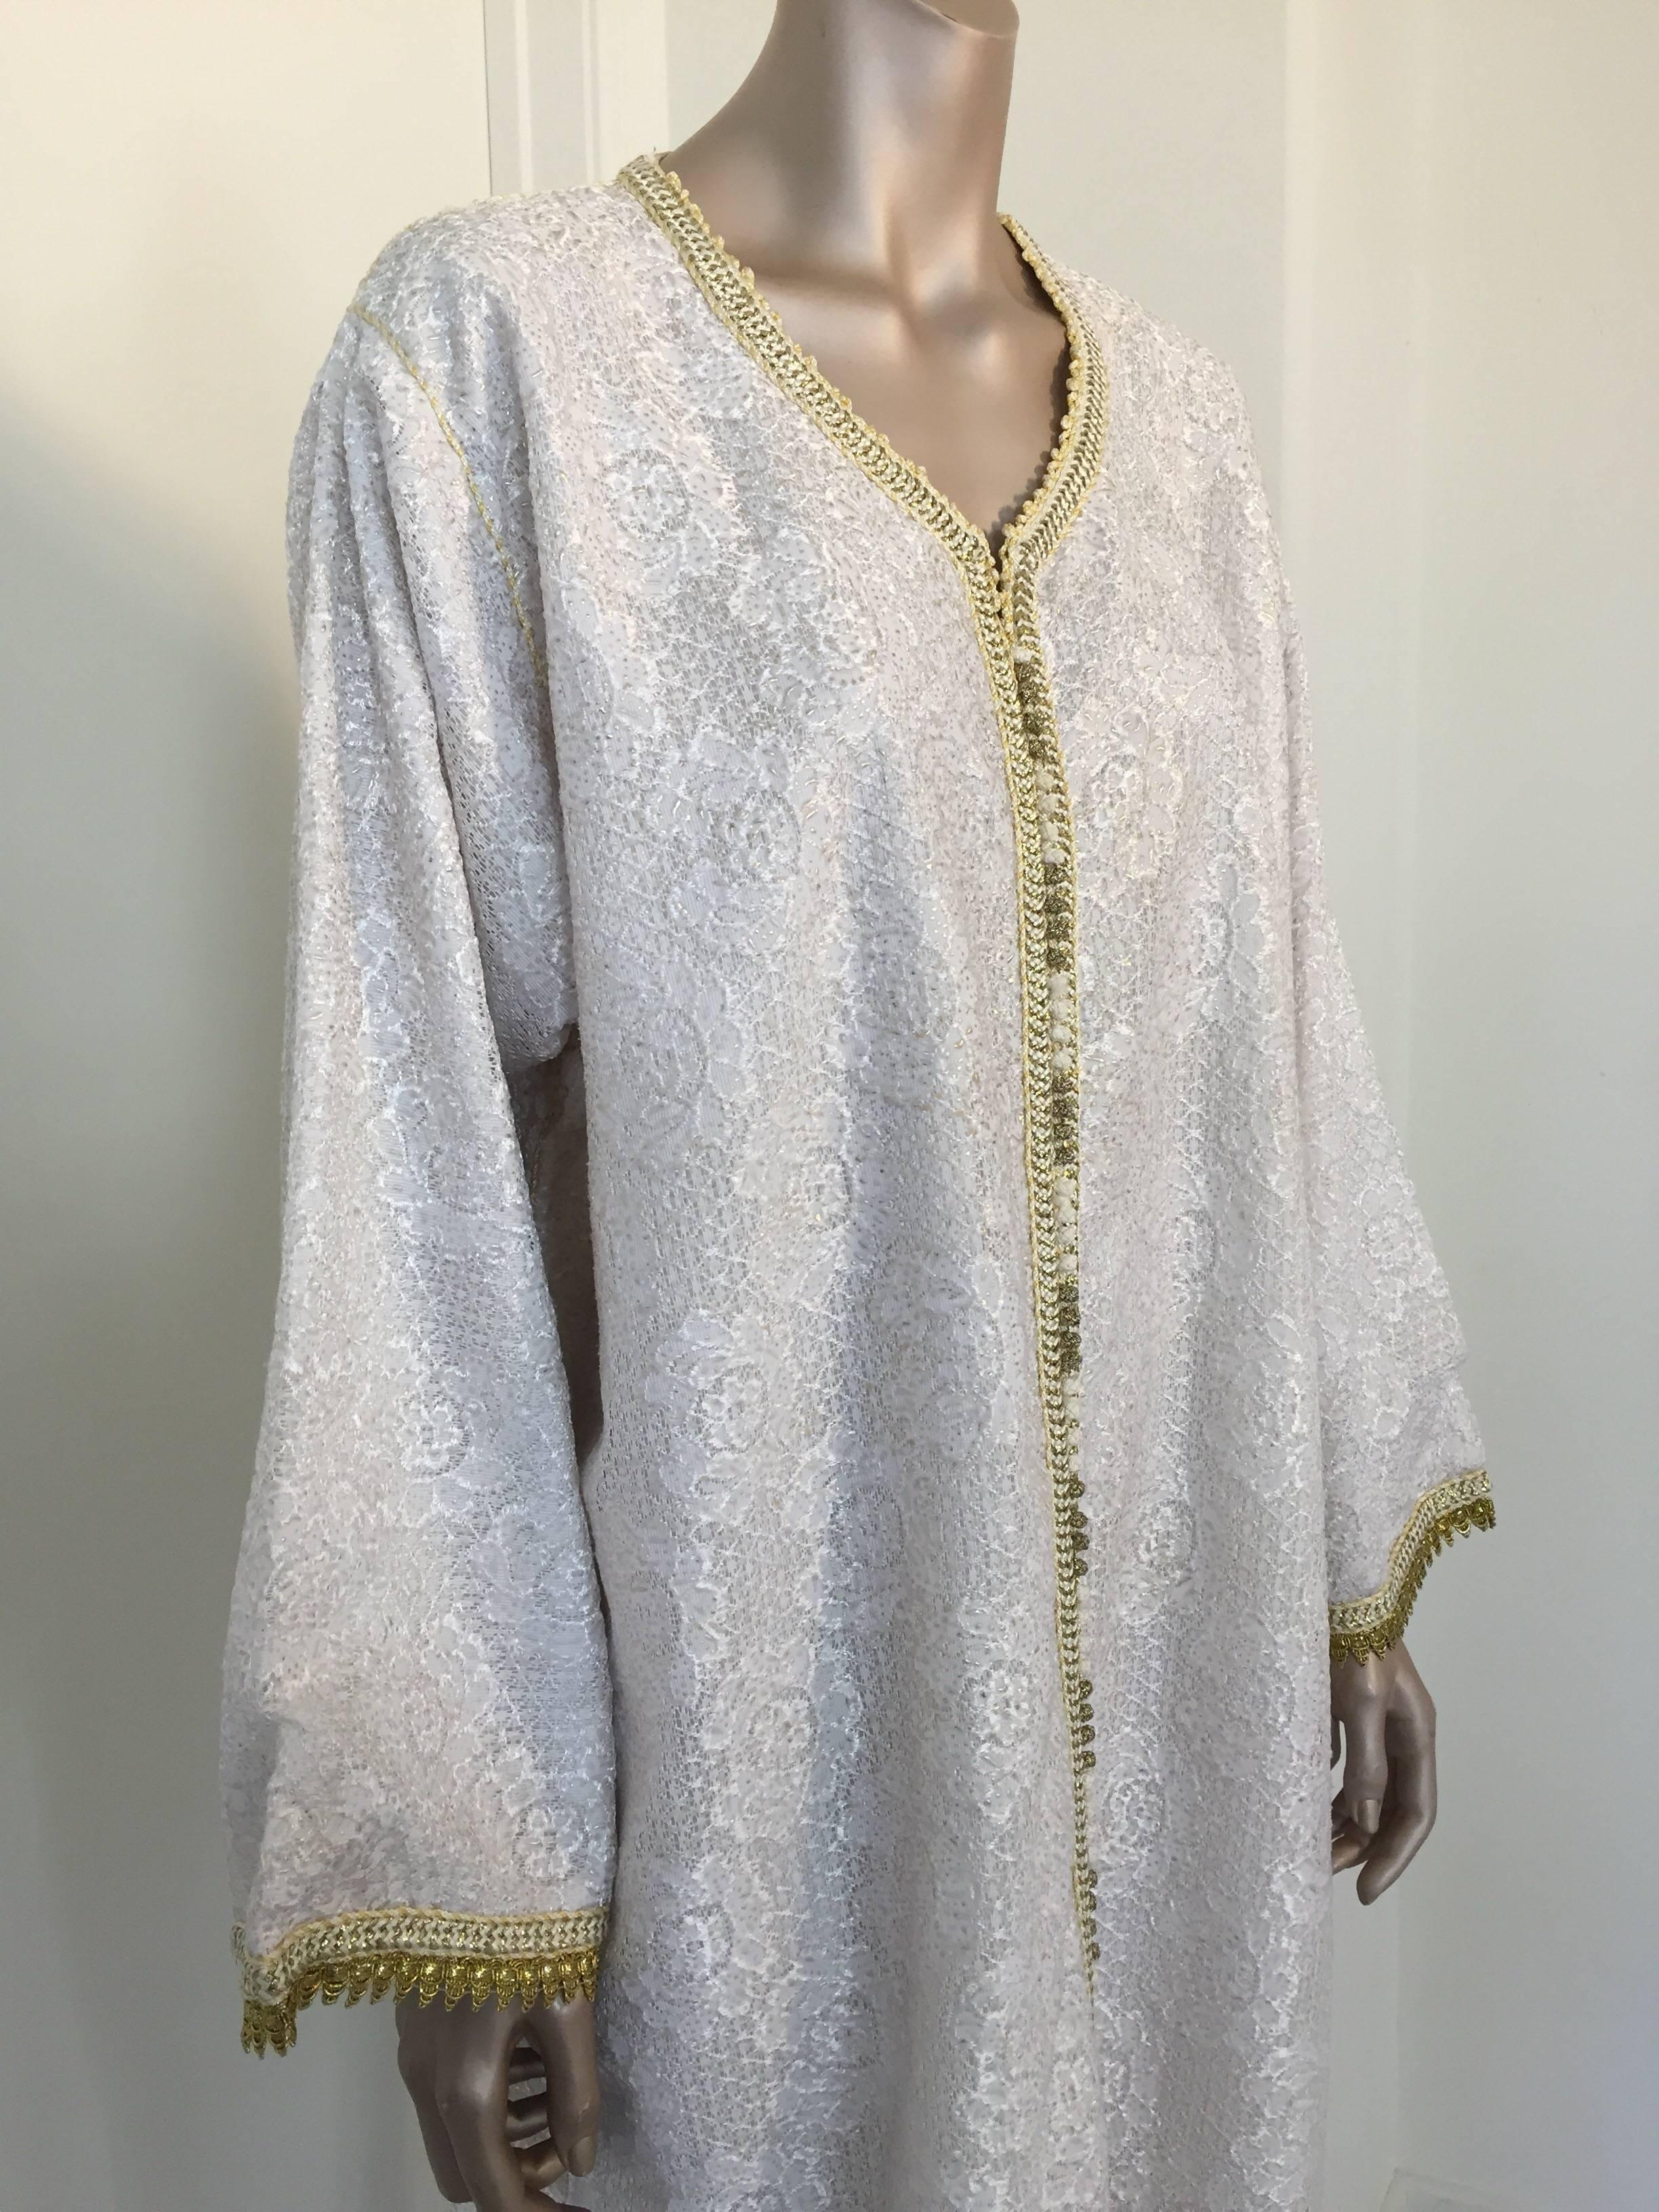 Gray Moroccan Vintage Caftan in White and Gold Lace 1970s Kaftan Maxi Dress Large For Sale